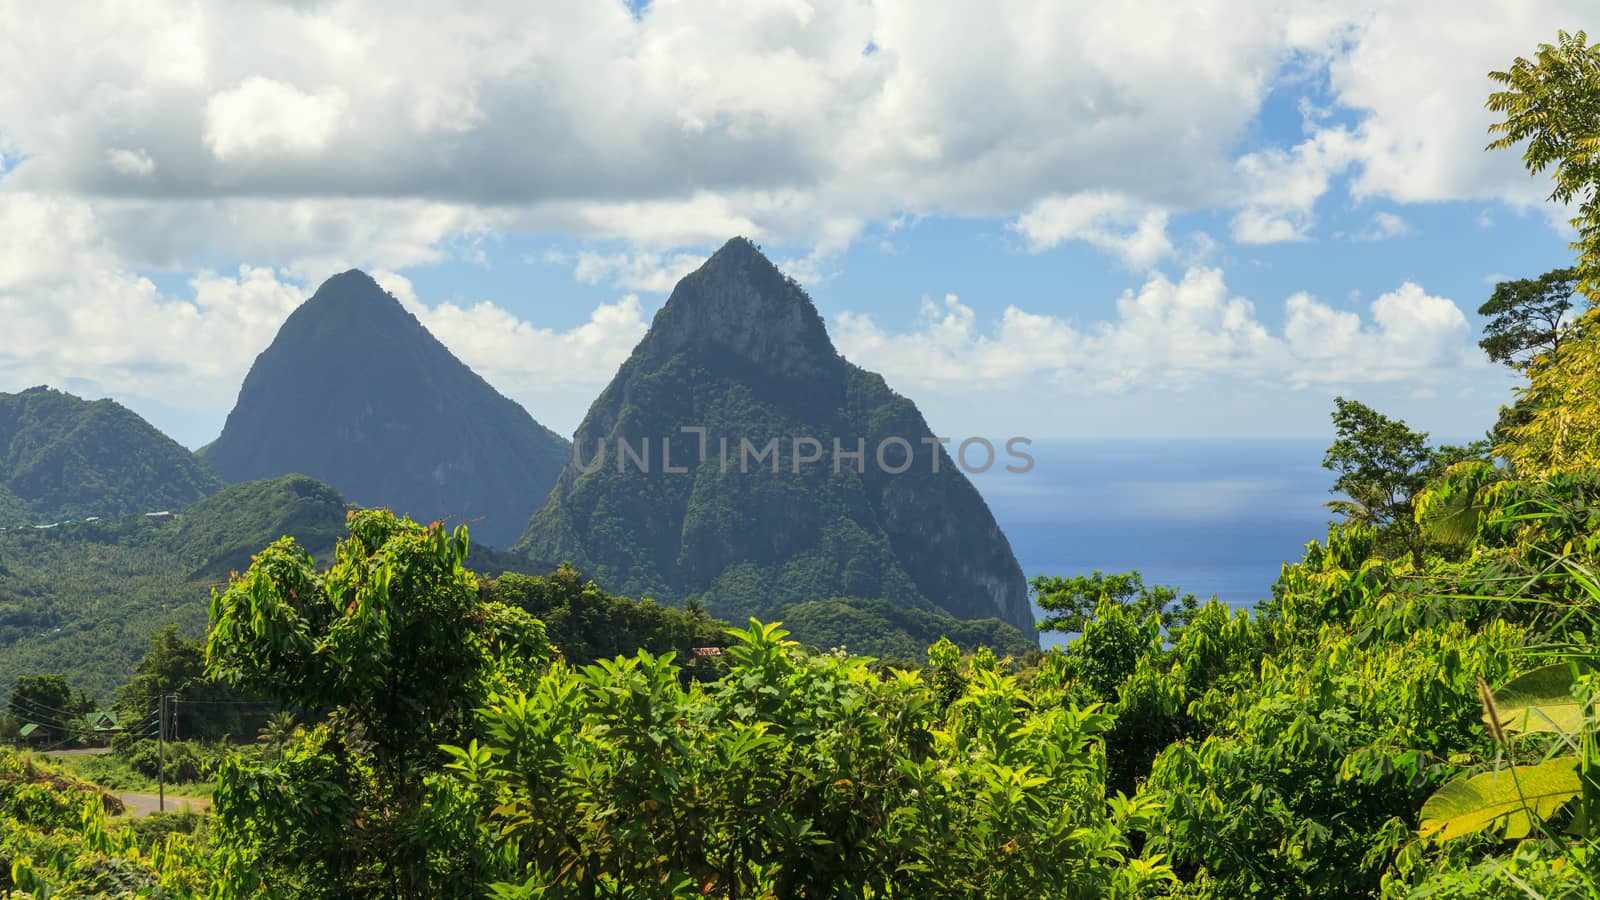 The Pitons are two volcanic spires on the Caribbean island of St Lucia and are a UNESCO world heritage site.